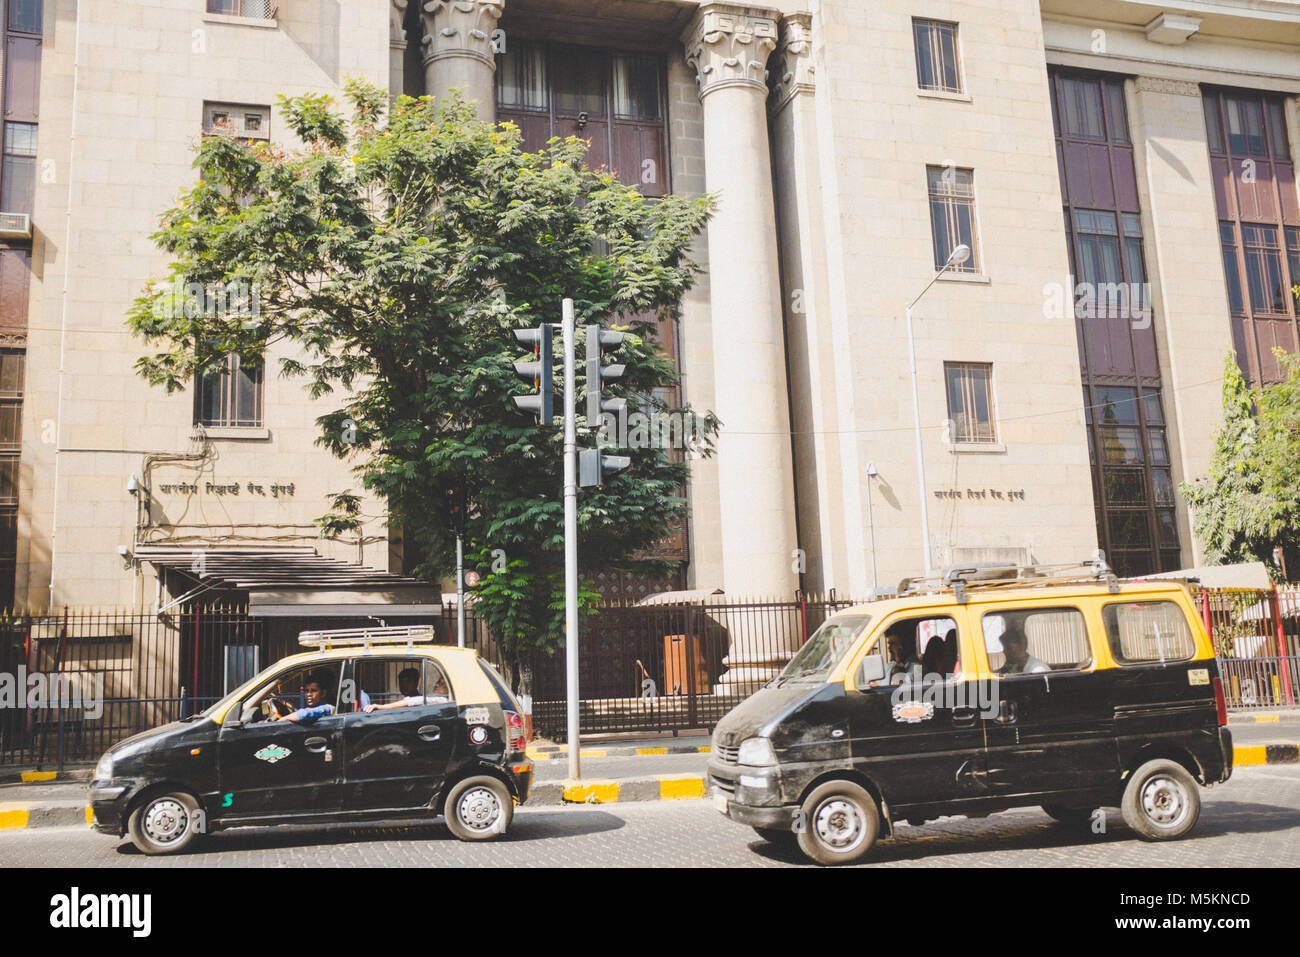 Taxis outside the economic central reserve bank building in Mumbai, India Stock Photo